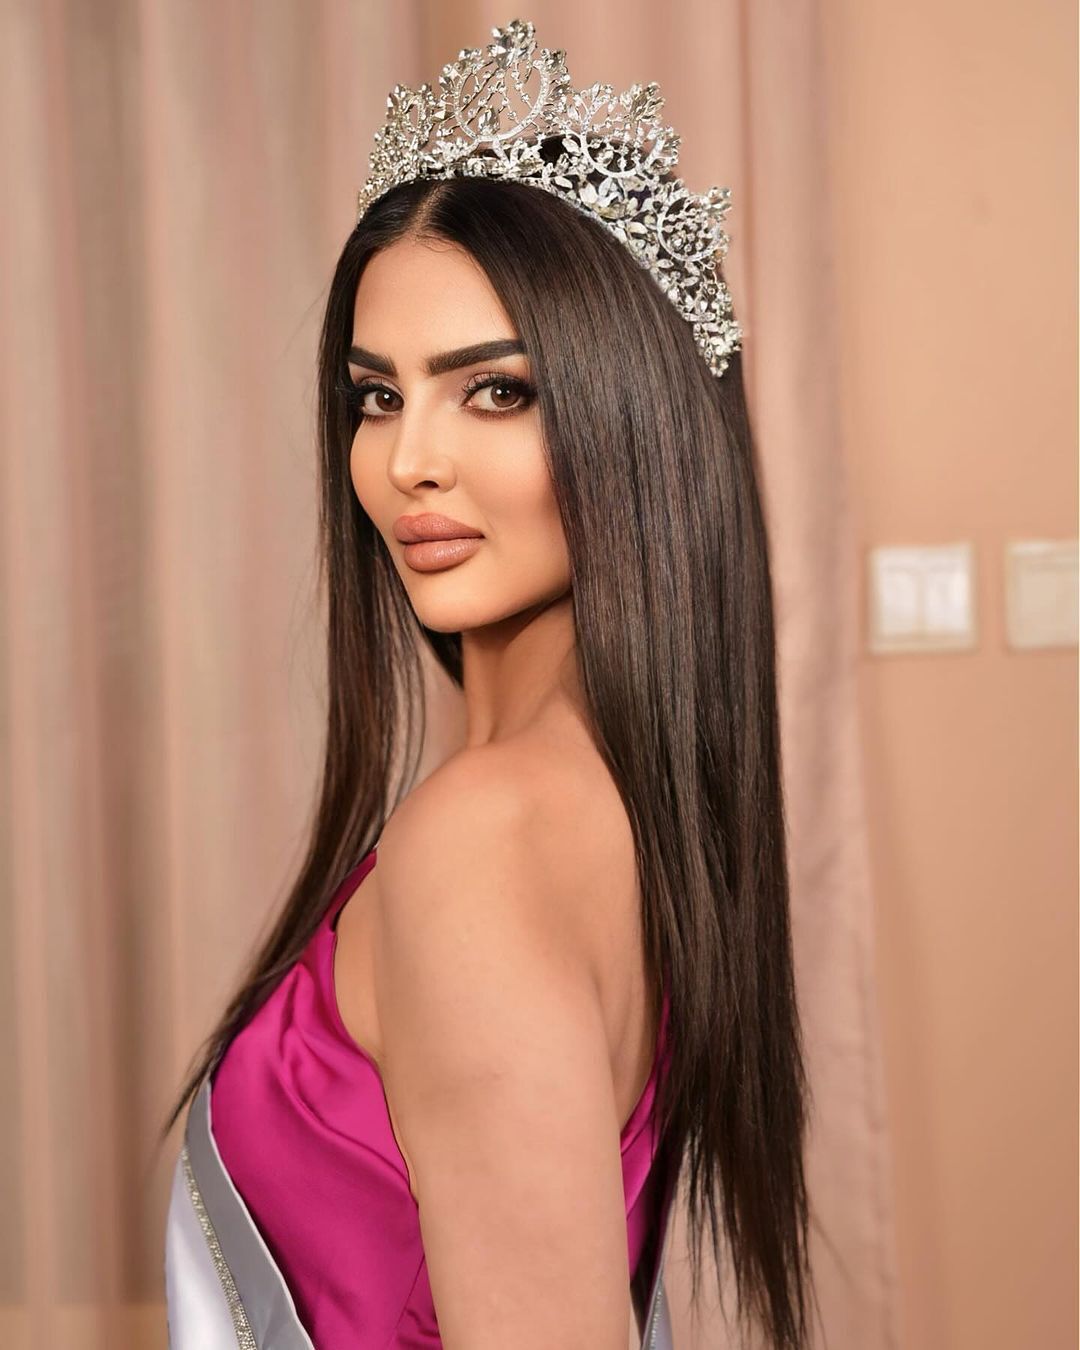 Miss Universe organizers denied Saudi Arabia's participation in the contest and accused the 27-year-old model of lying